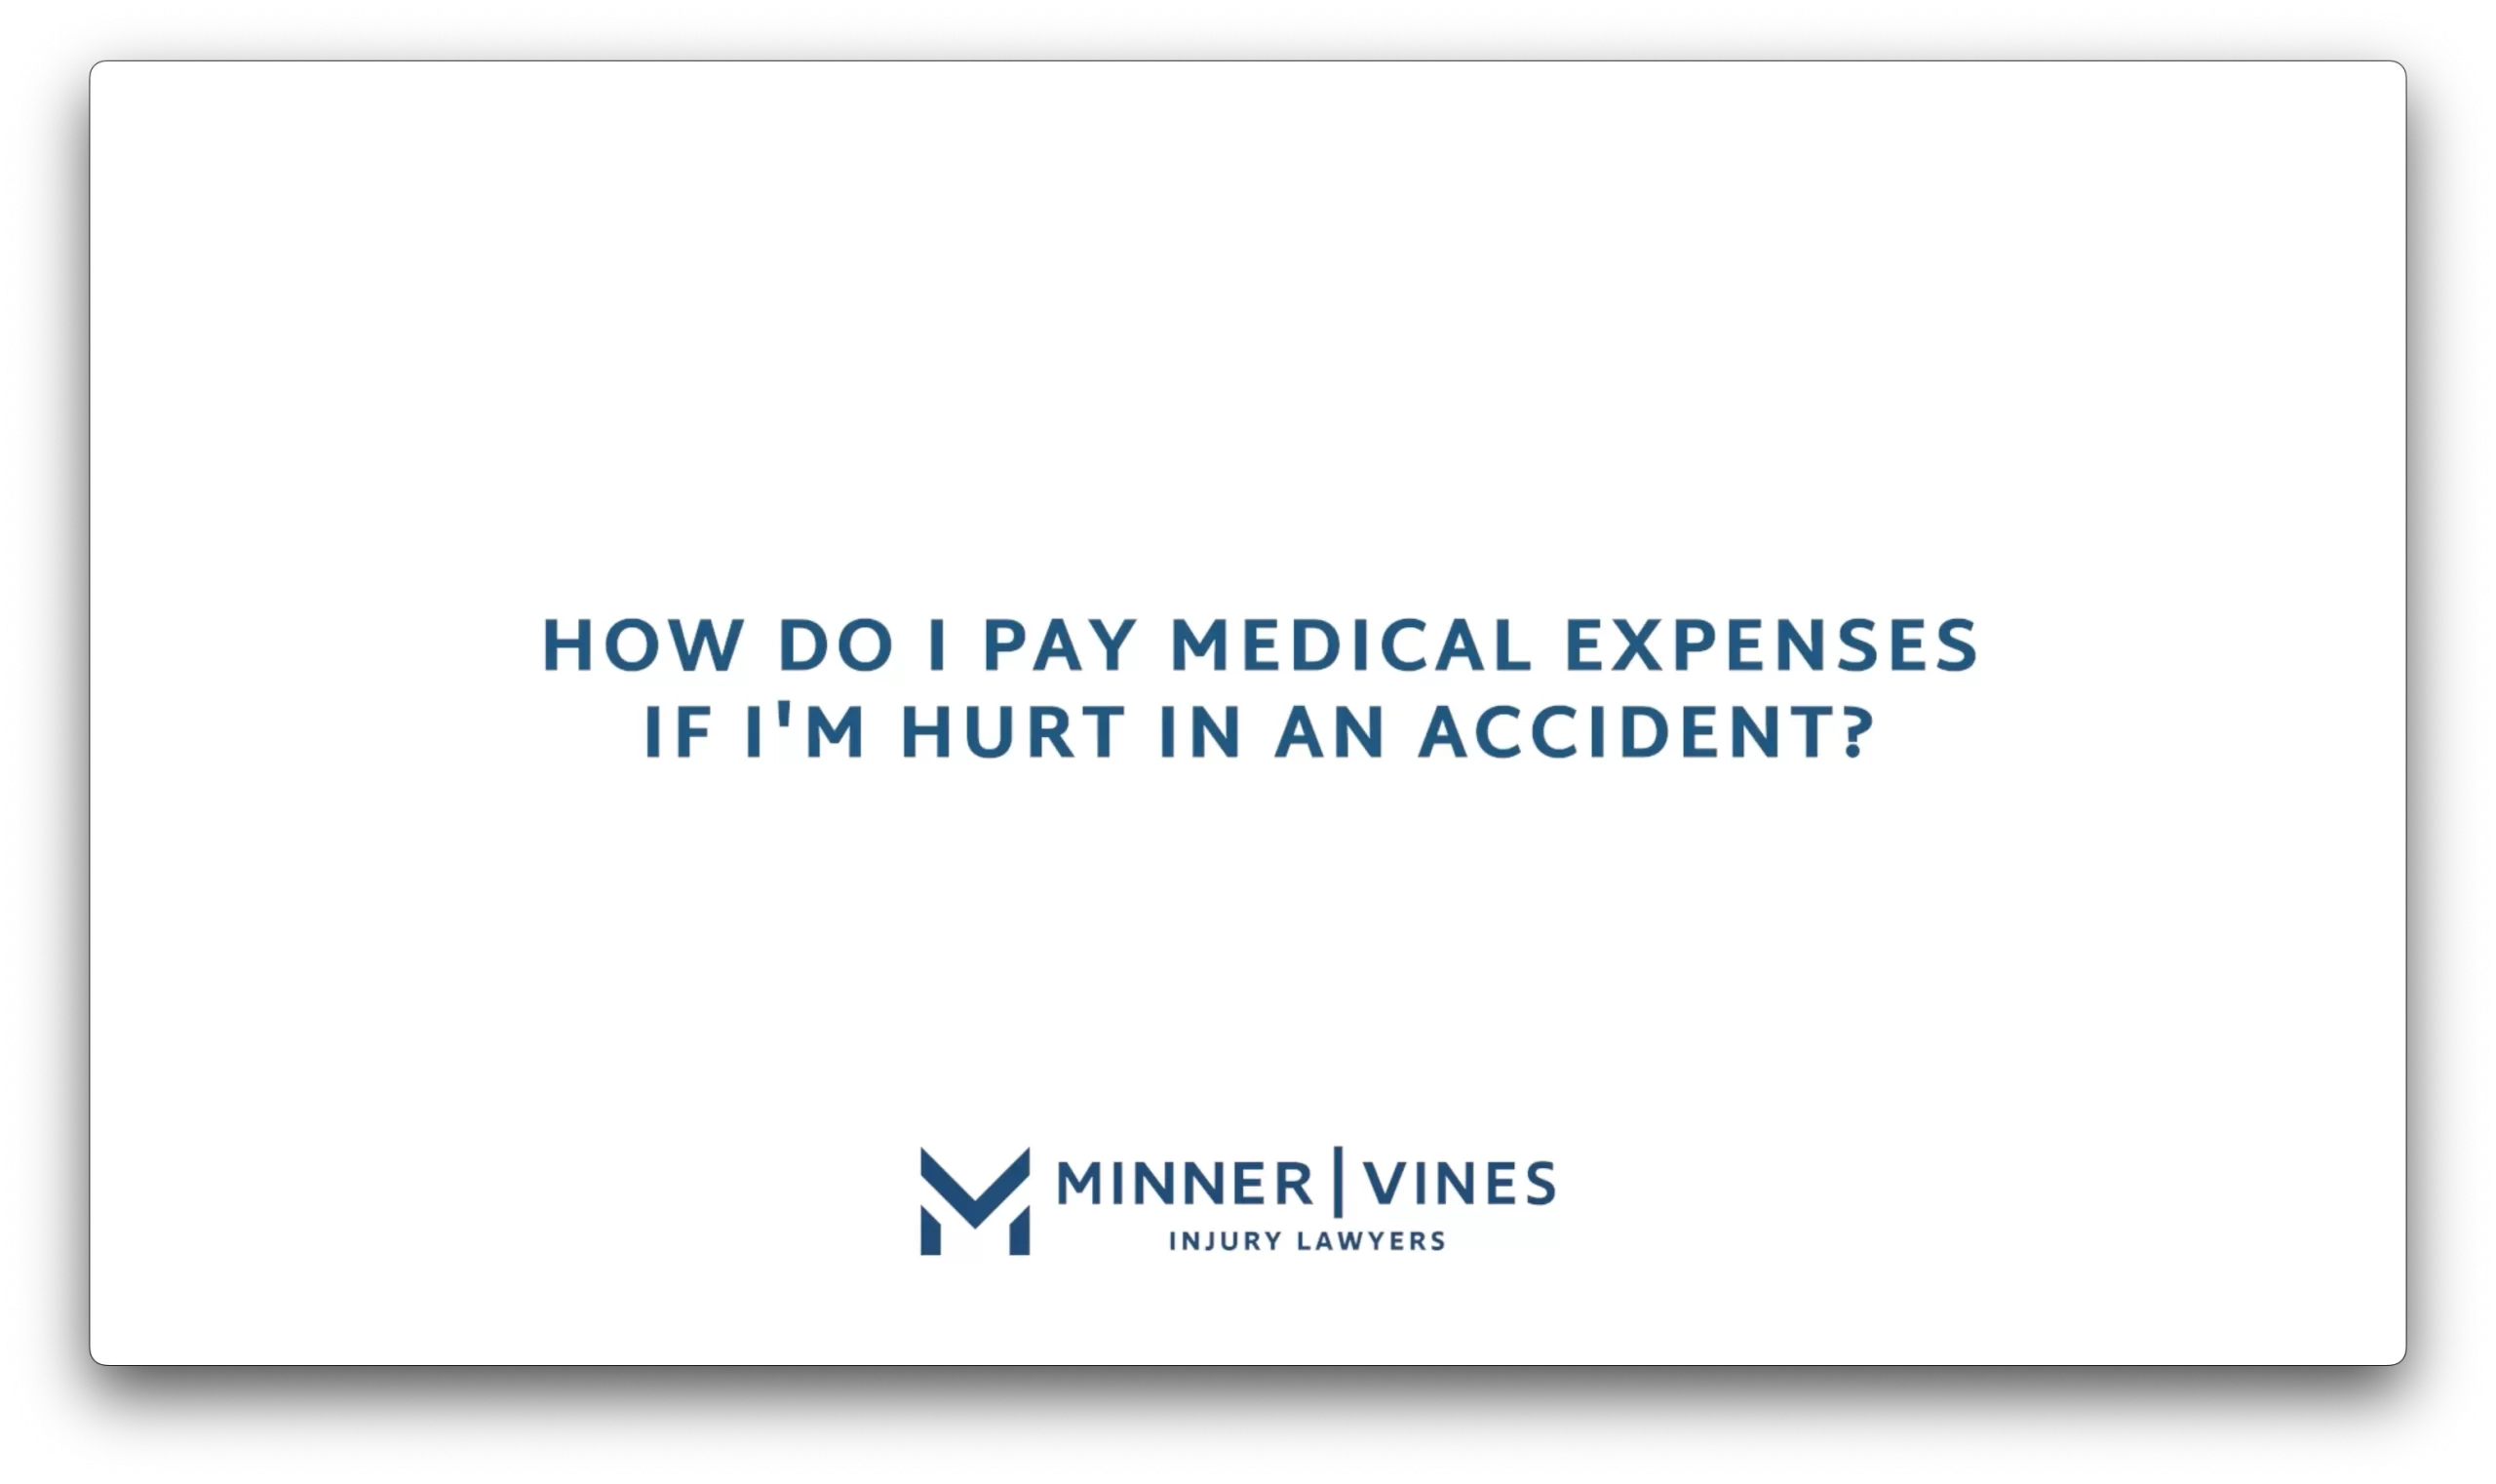 How do I pay medical expenses if I’m hurt in an accident?